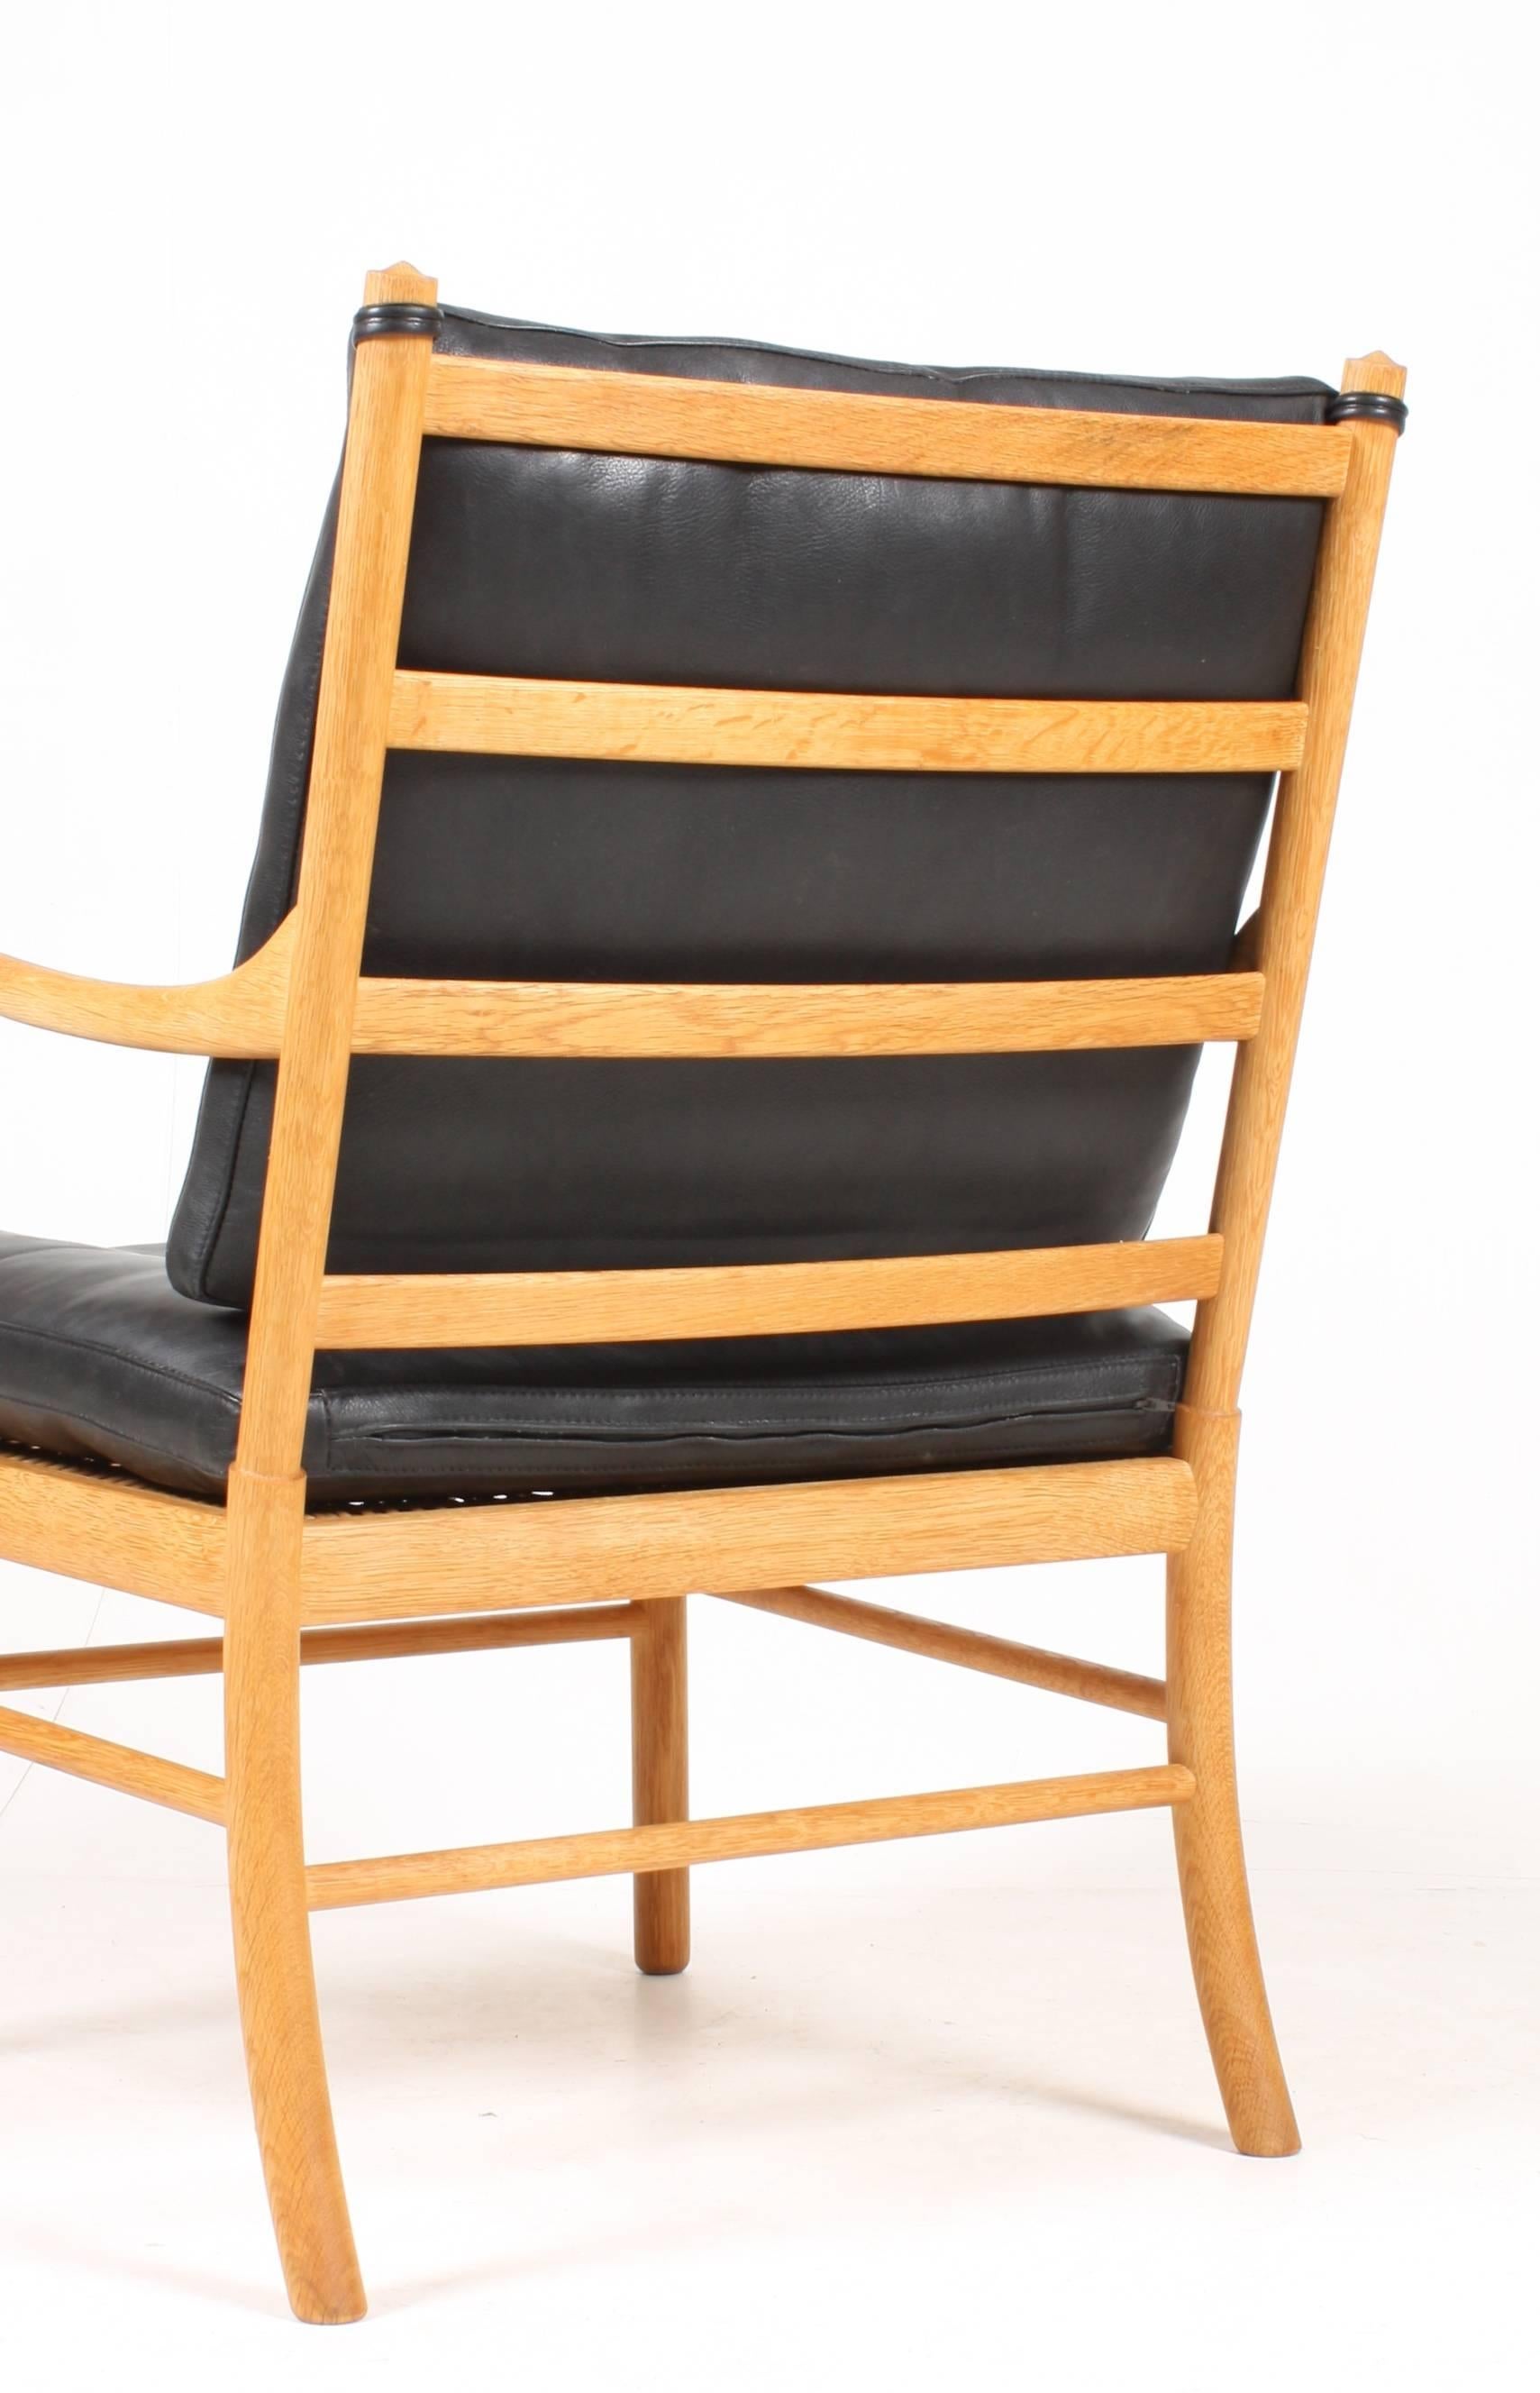 Pair of nicely patinated lounge chairs in oak and leather designed by Maa. Ole Wanscher in 1949. Made by Peter Jeppesen Cabinetmakers. Made in Denmark in the 1970s. The chairs are cleaned up and waxed, very nice condition.